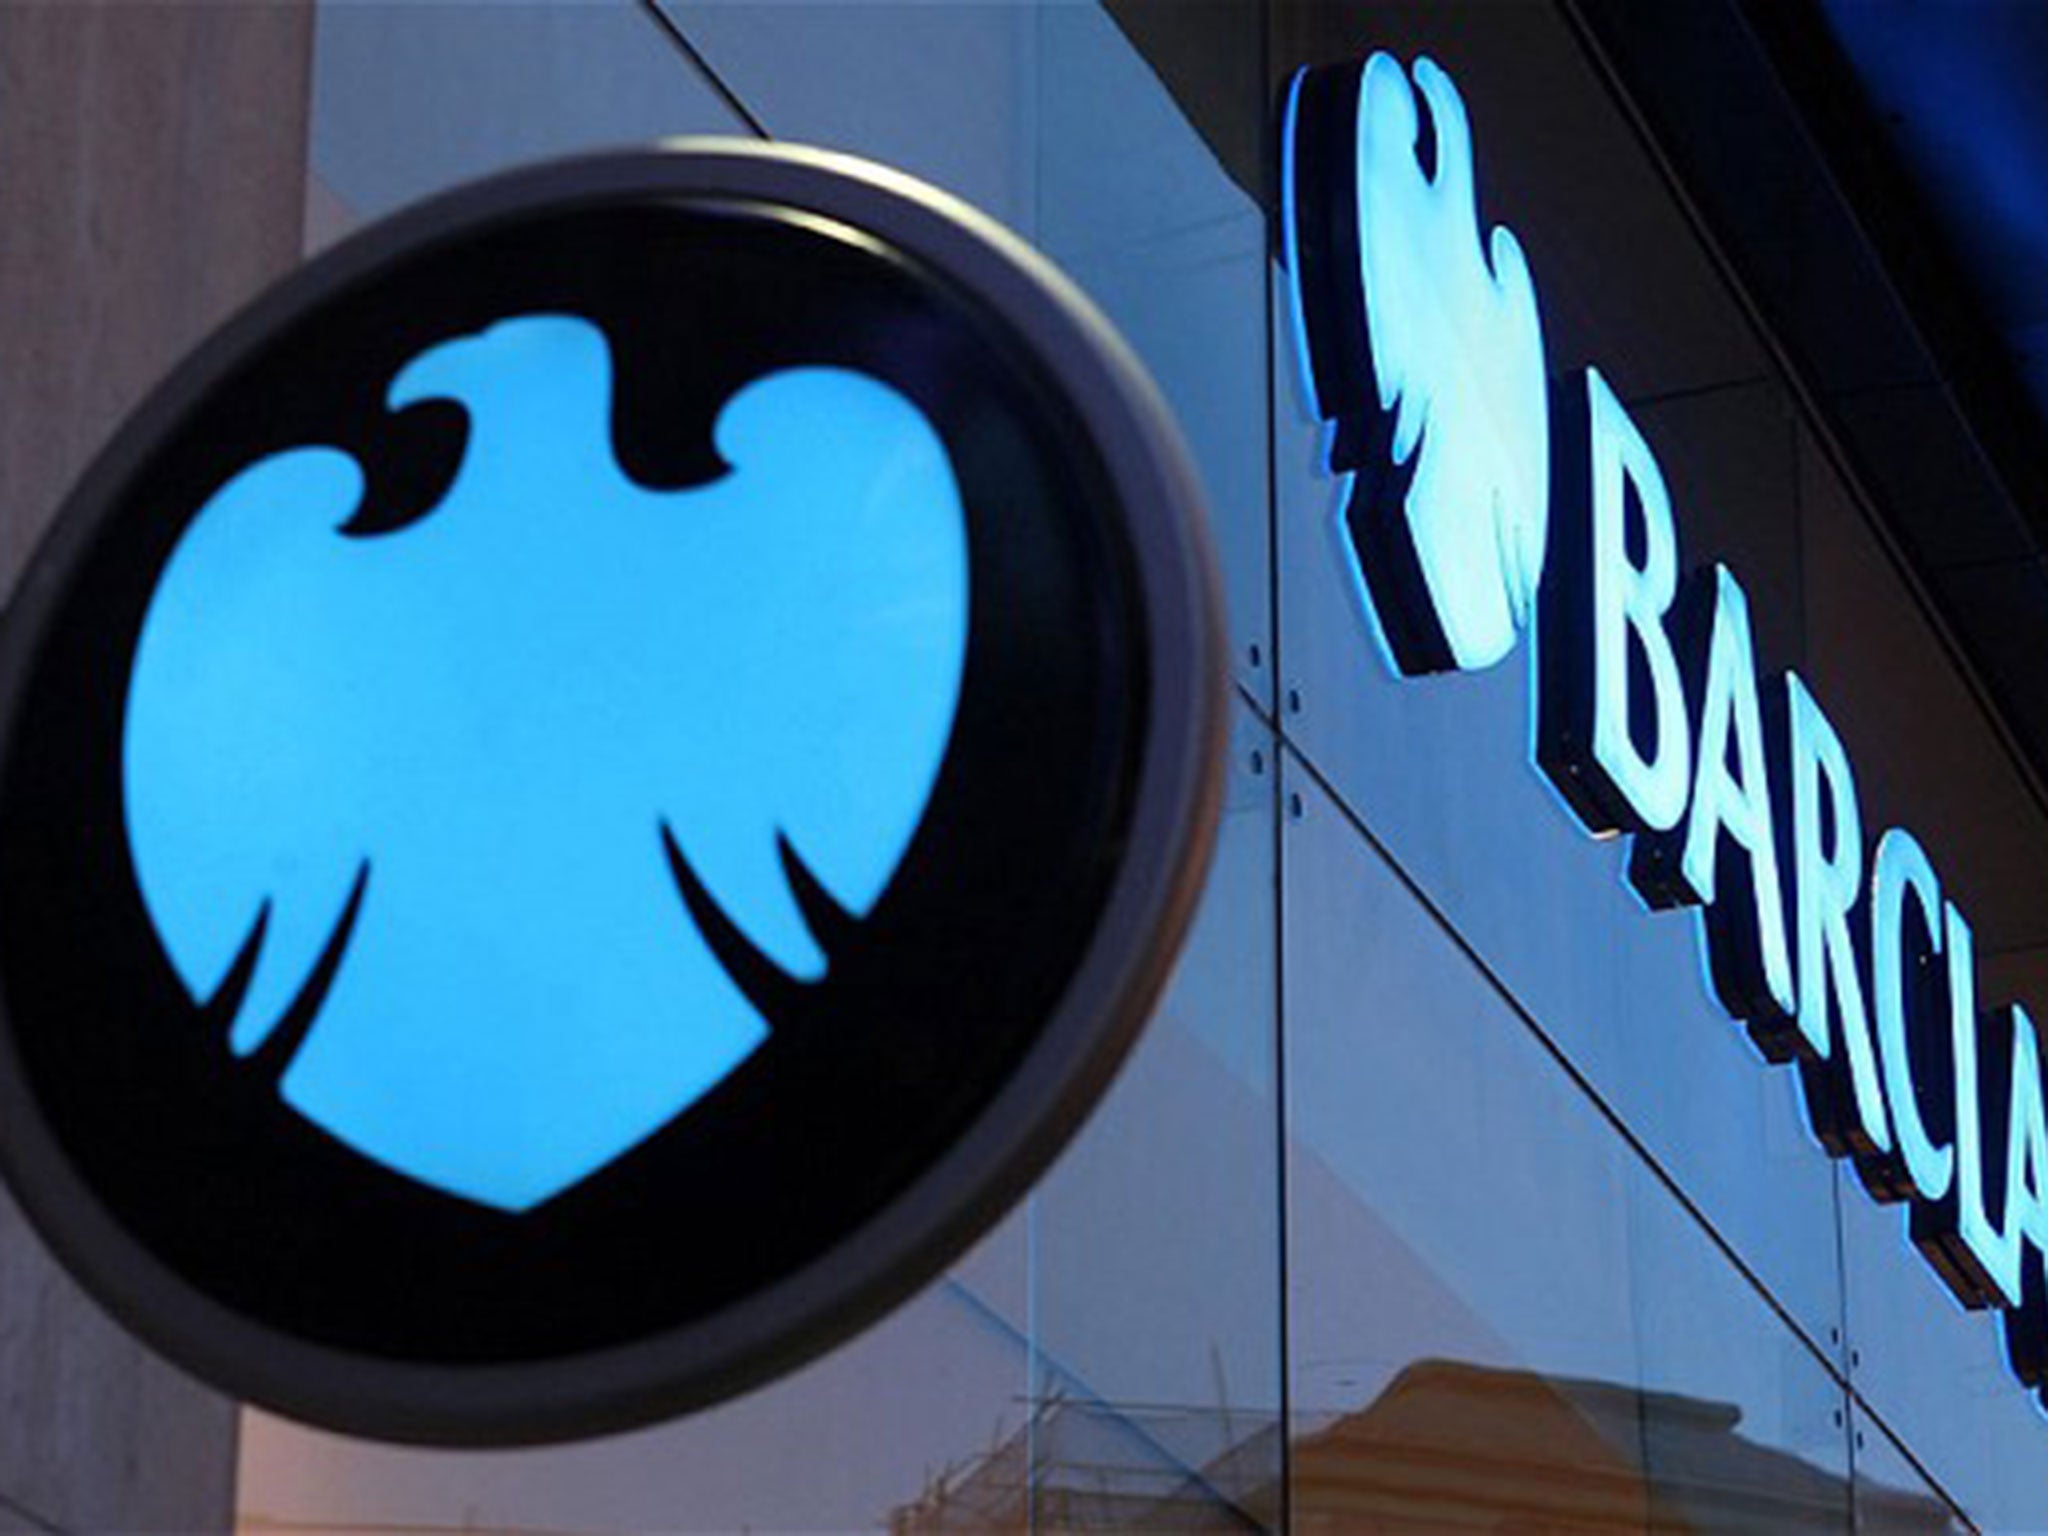 Although "dark pools" are perfectly legal, Barclays is accused of giving a systematic advantage to high-frequency traders